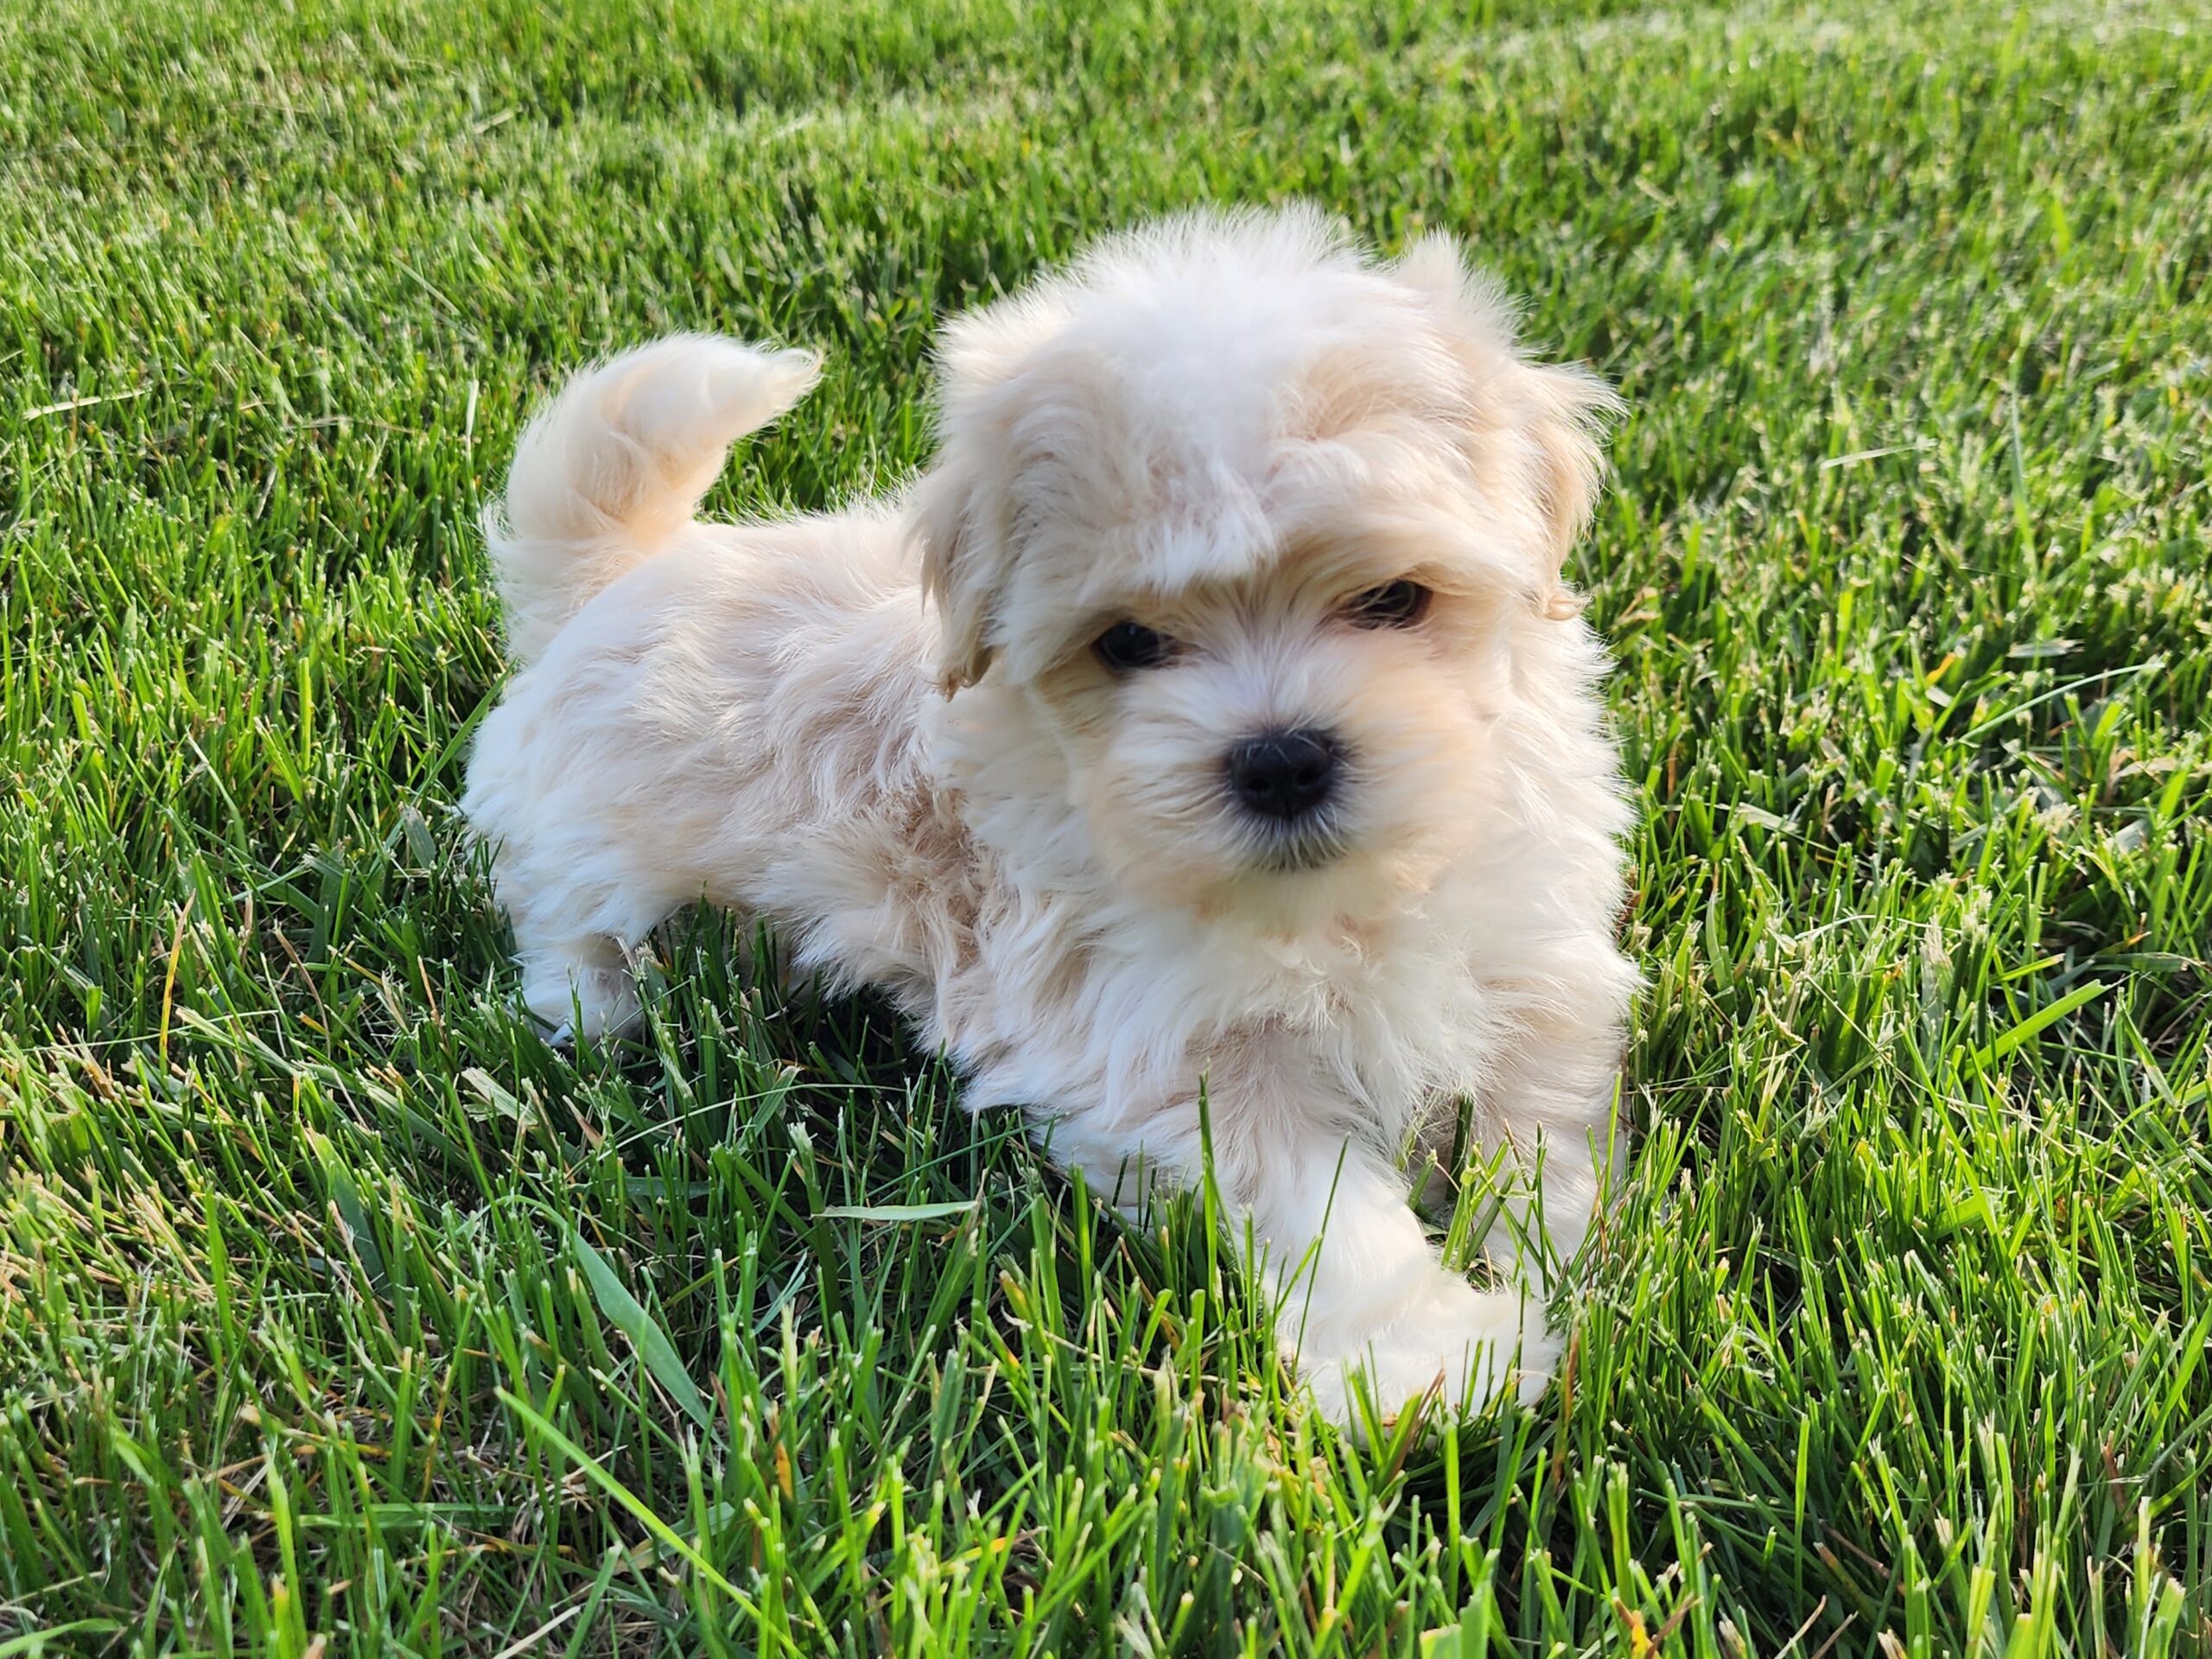 "Oakley" DOB: 4/4/2023. Sex: Male. Breed: Havanese. Available June 1, 2023. Price: $1500